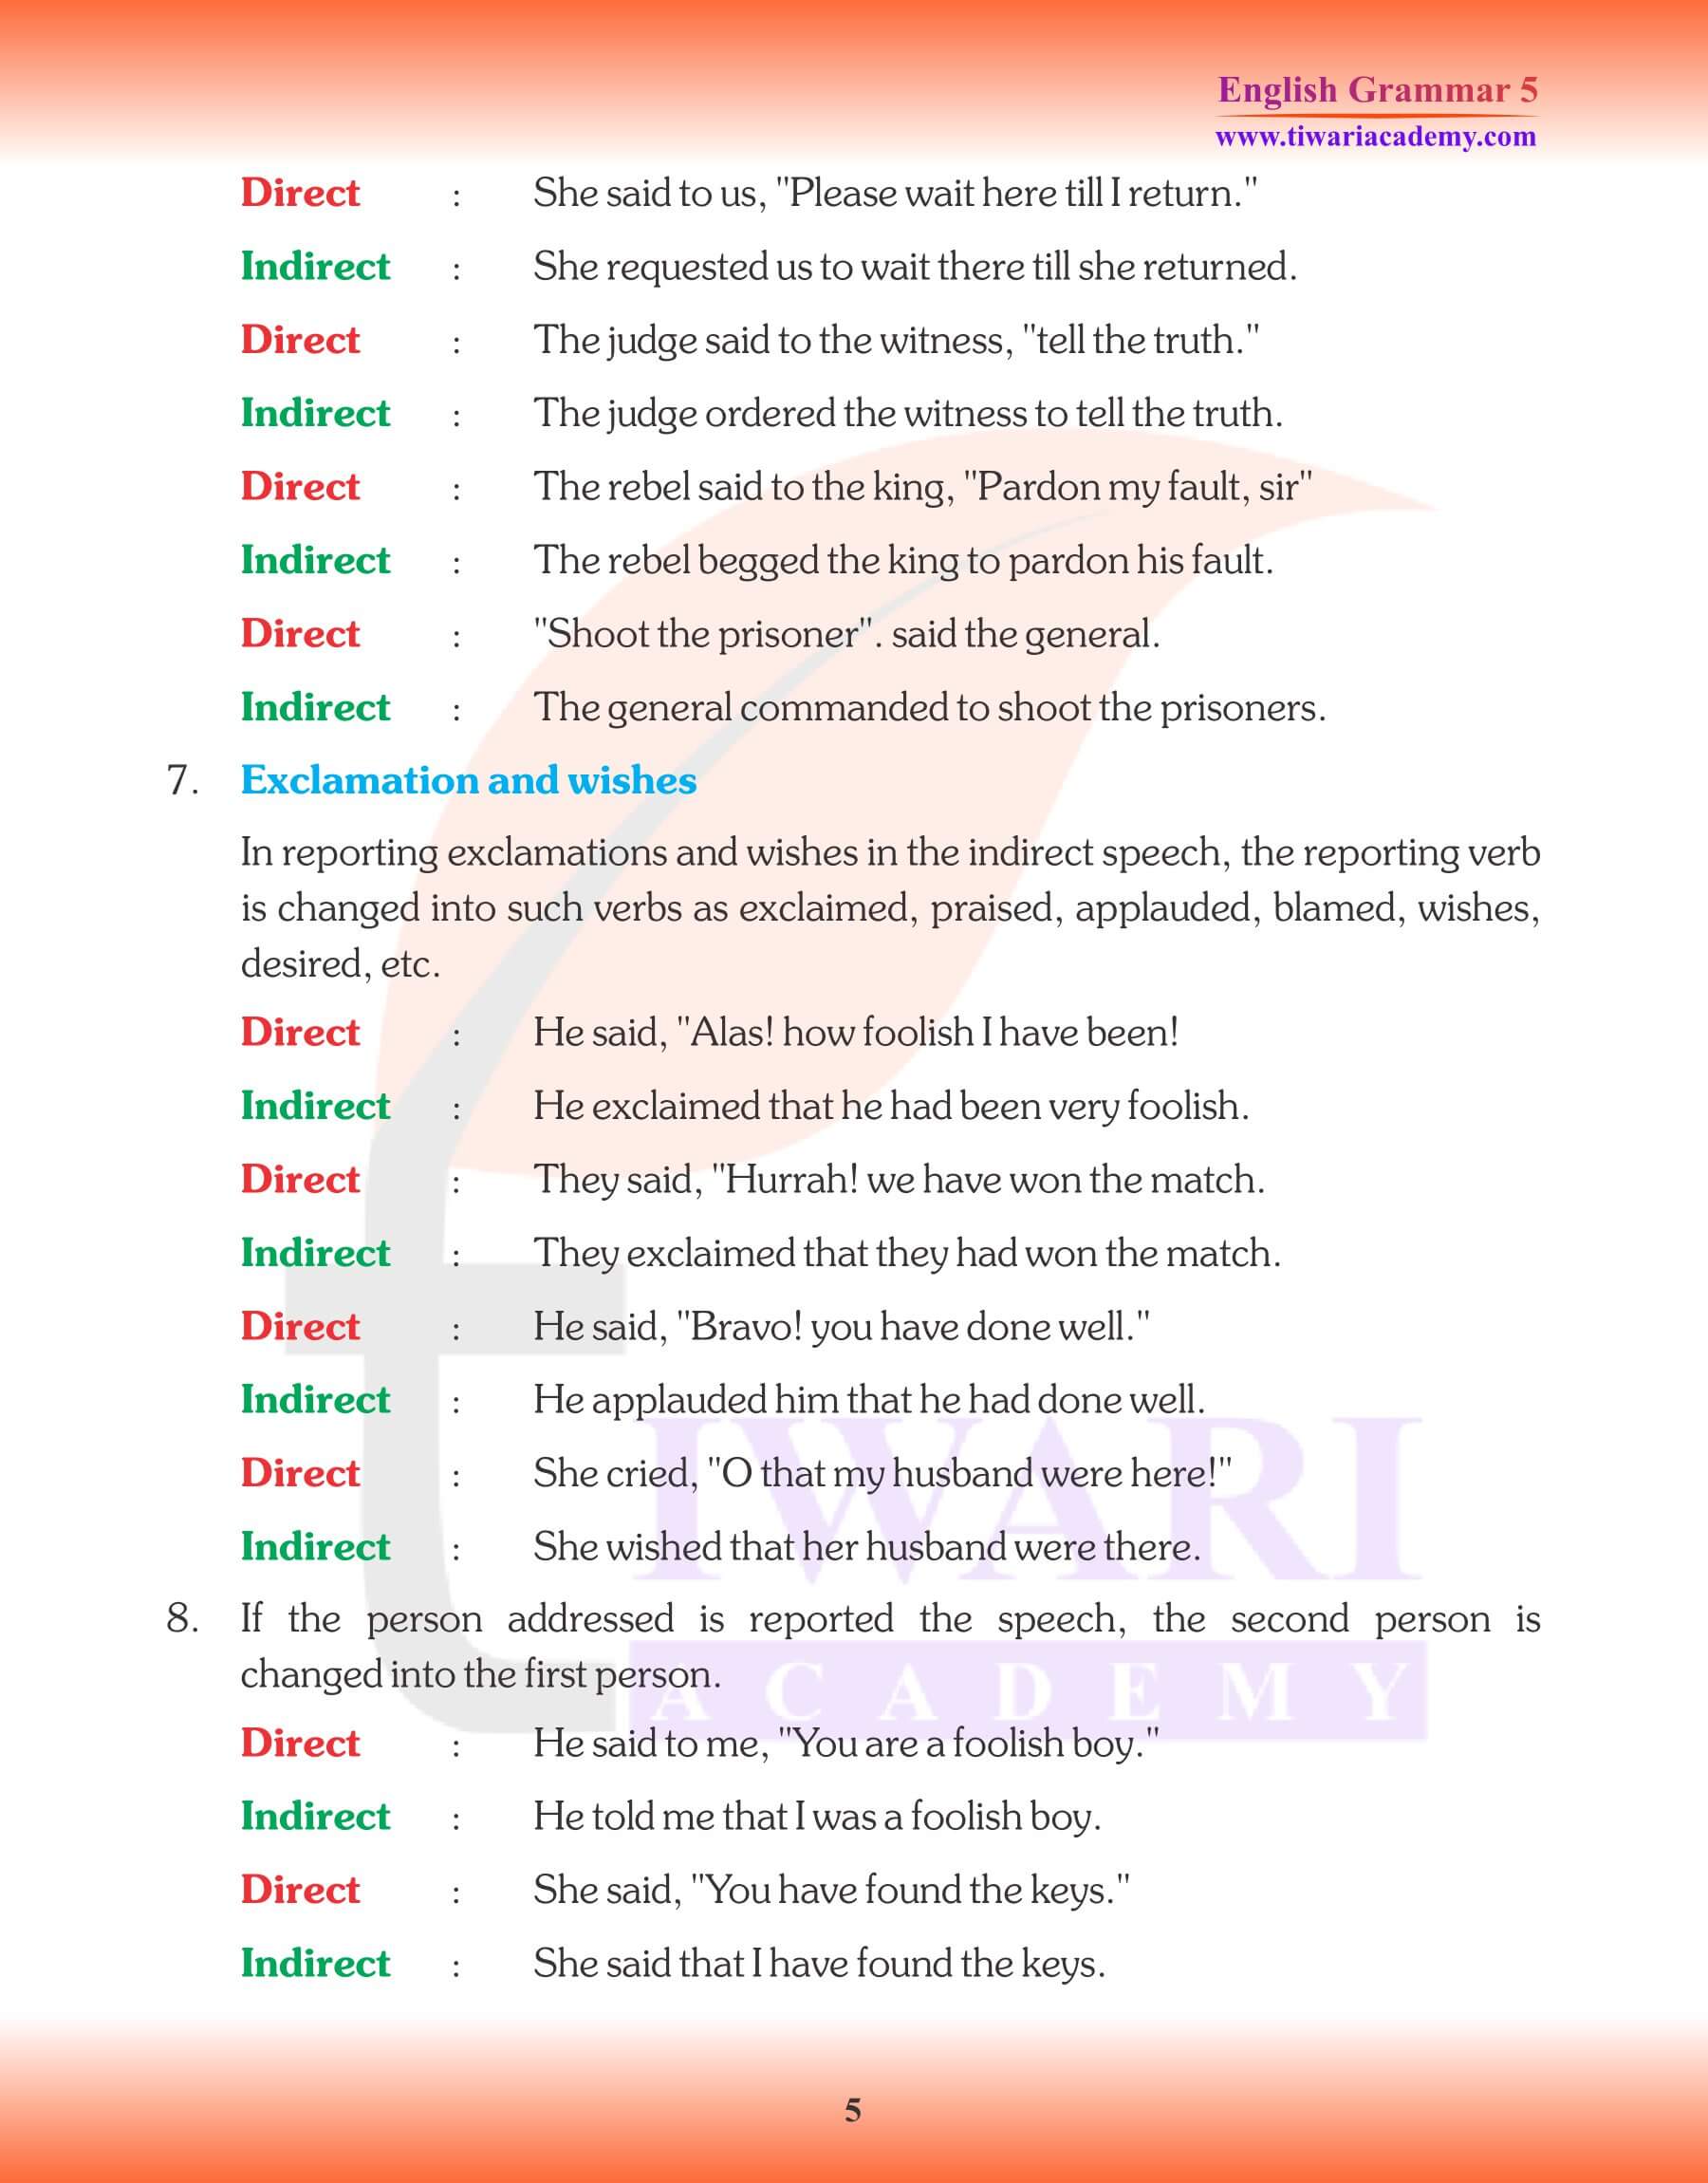 Class 5 Grammar Direct and Indirect